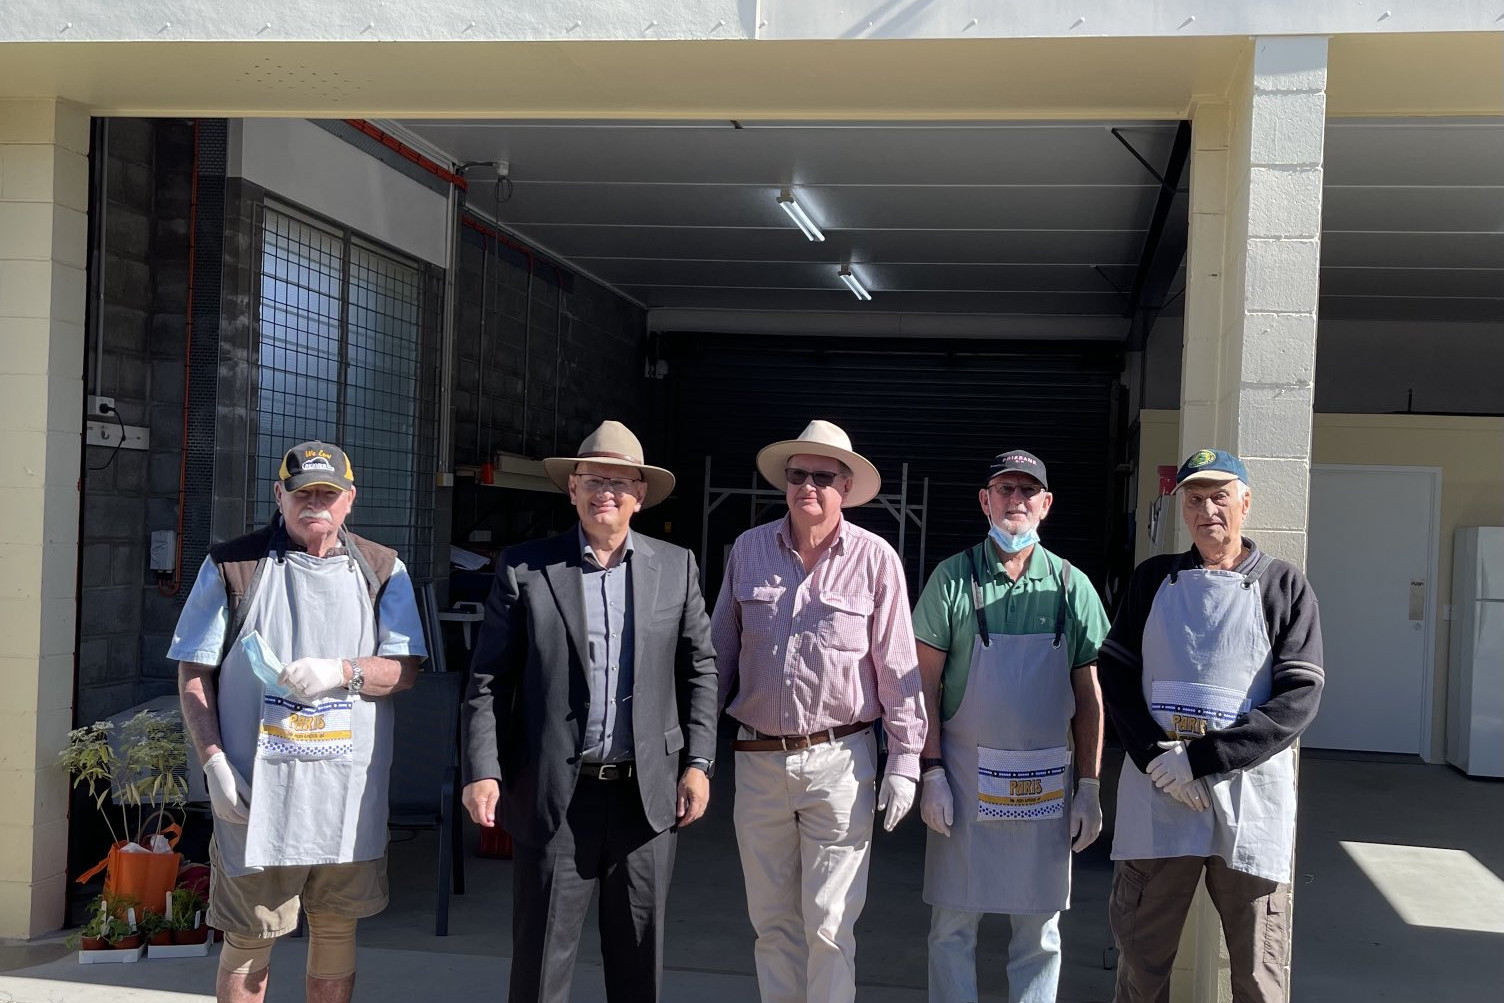 Federal Member for Blair Shayne Neumann has announced that Esk Men’s Shed has received a grant to assist with an upgrade to their facilities.